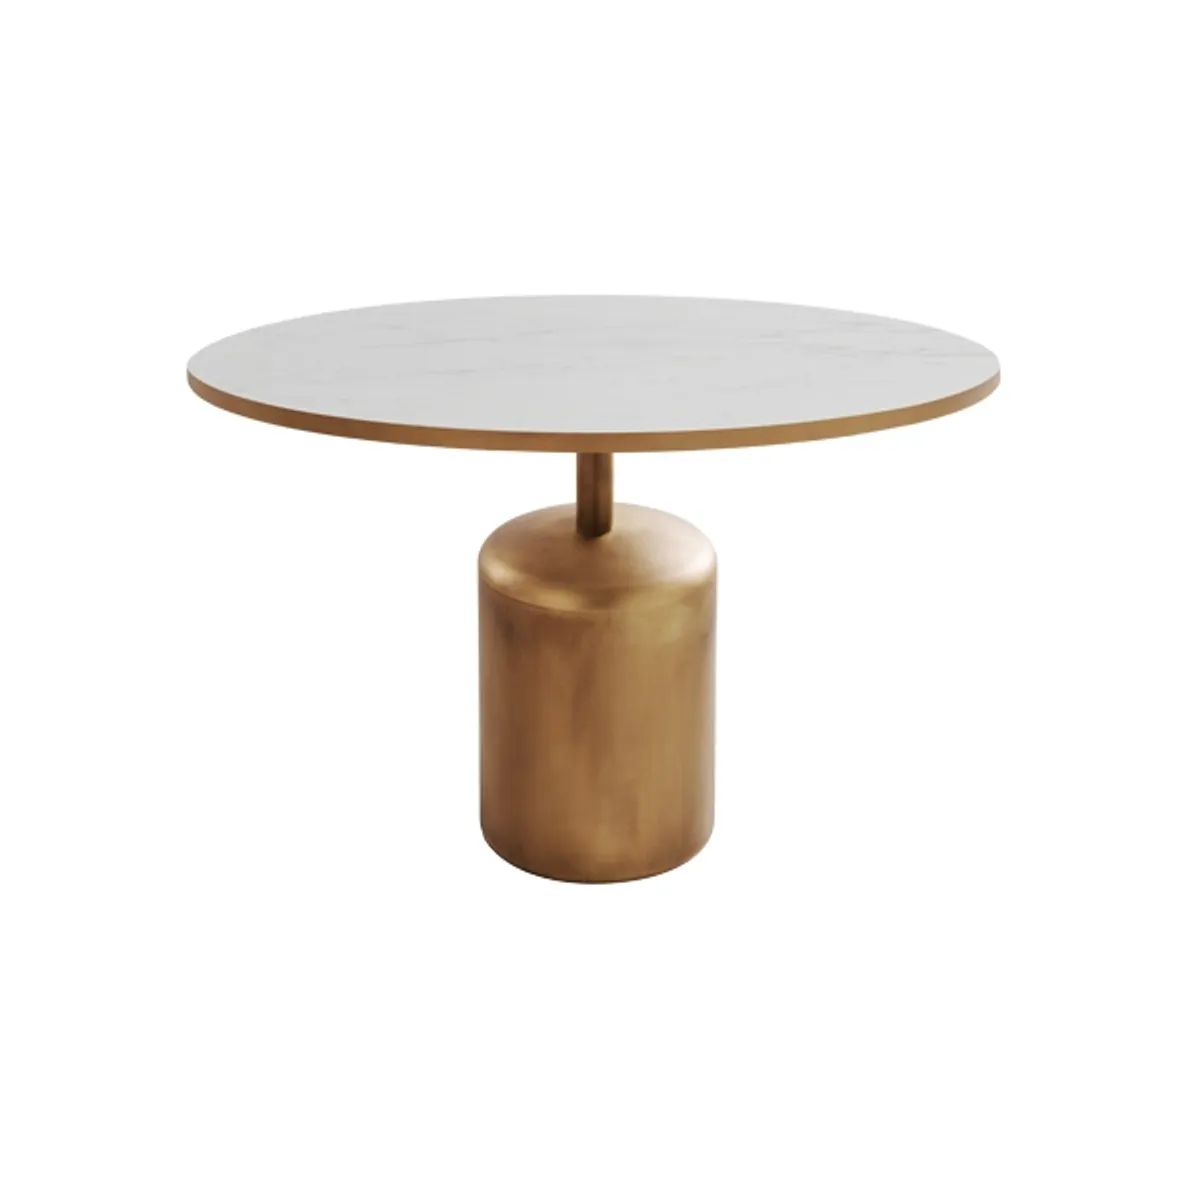 Brunella table Inside Out Contracts